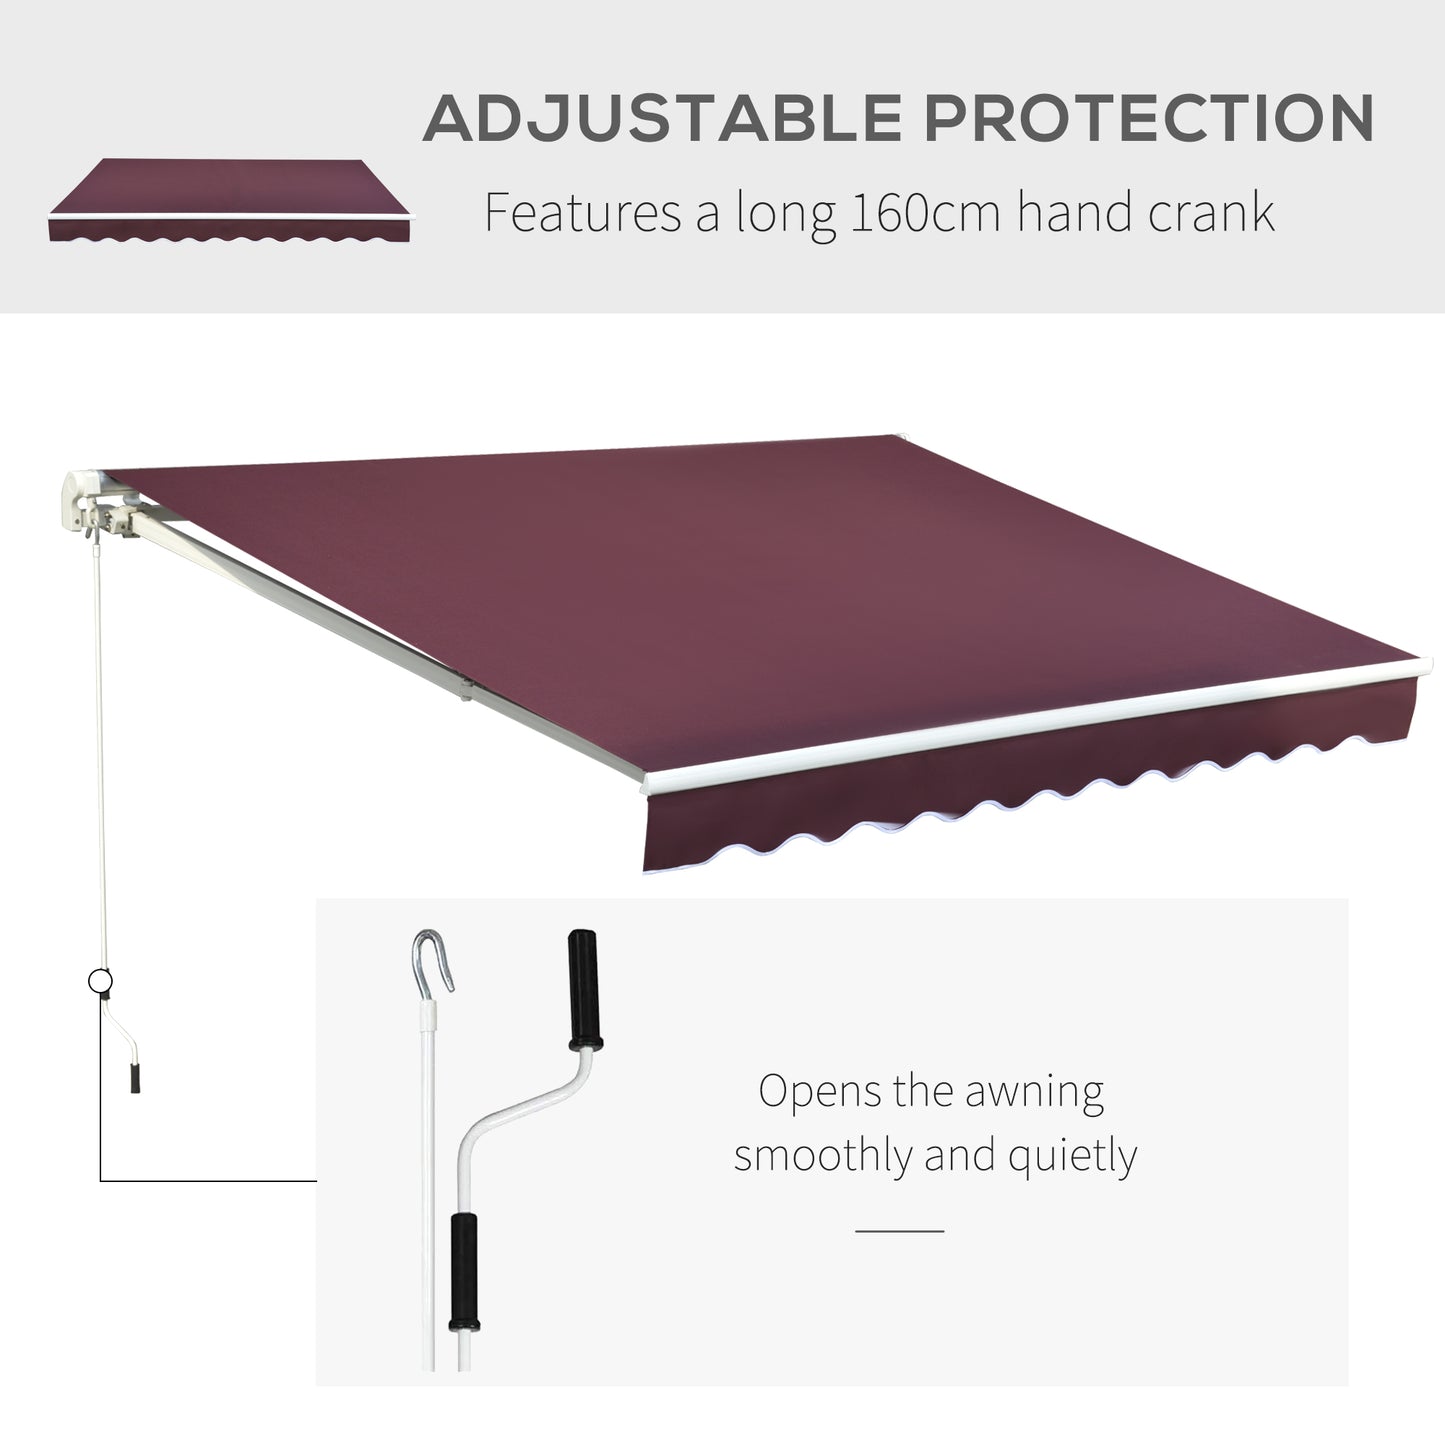 Outsunny 3x4m Retractable Manual Awning Window Door Sun Shade Canopy with Fittings and Crank Handle Wine Red w/